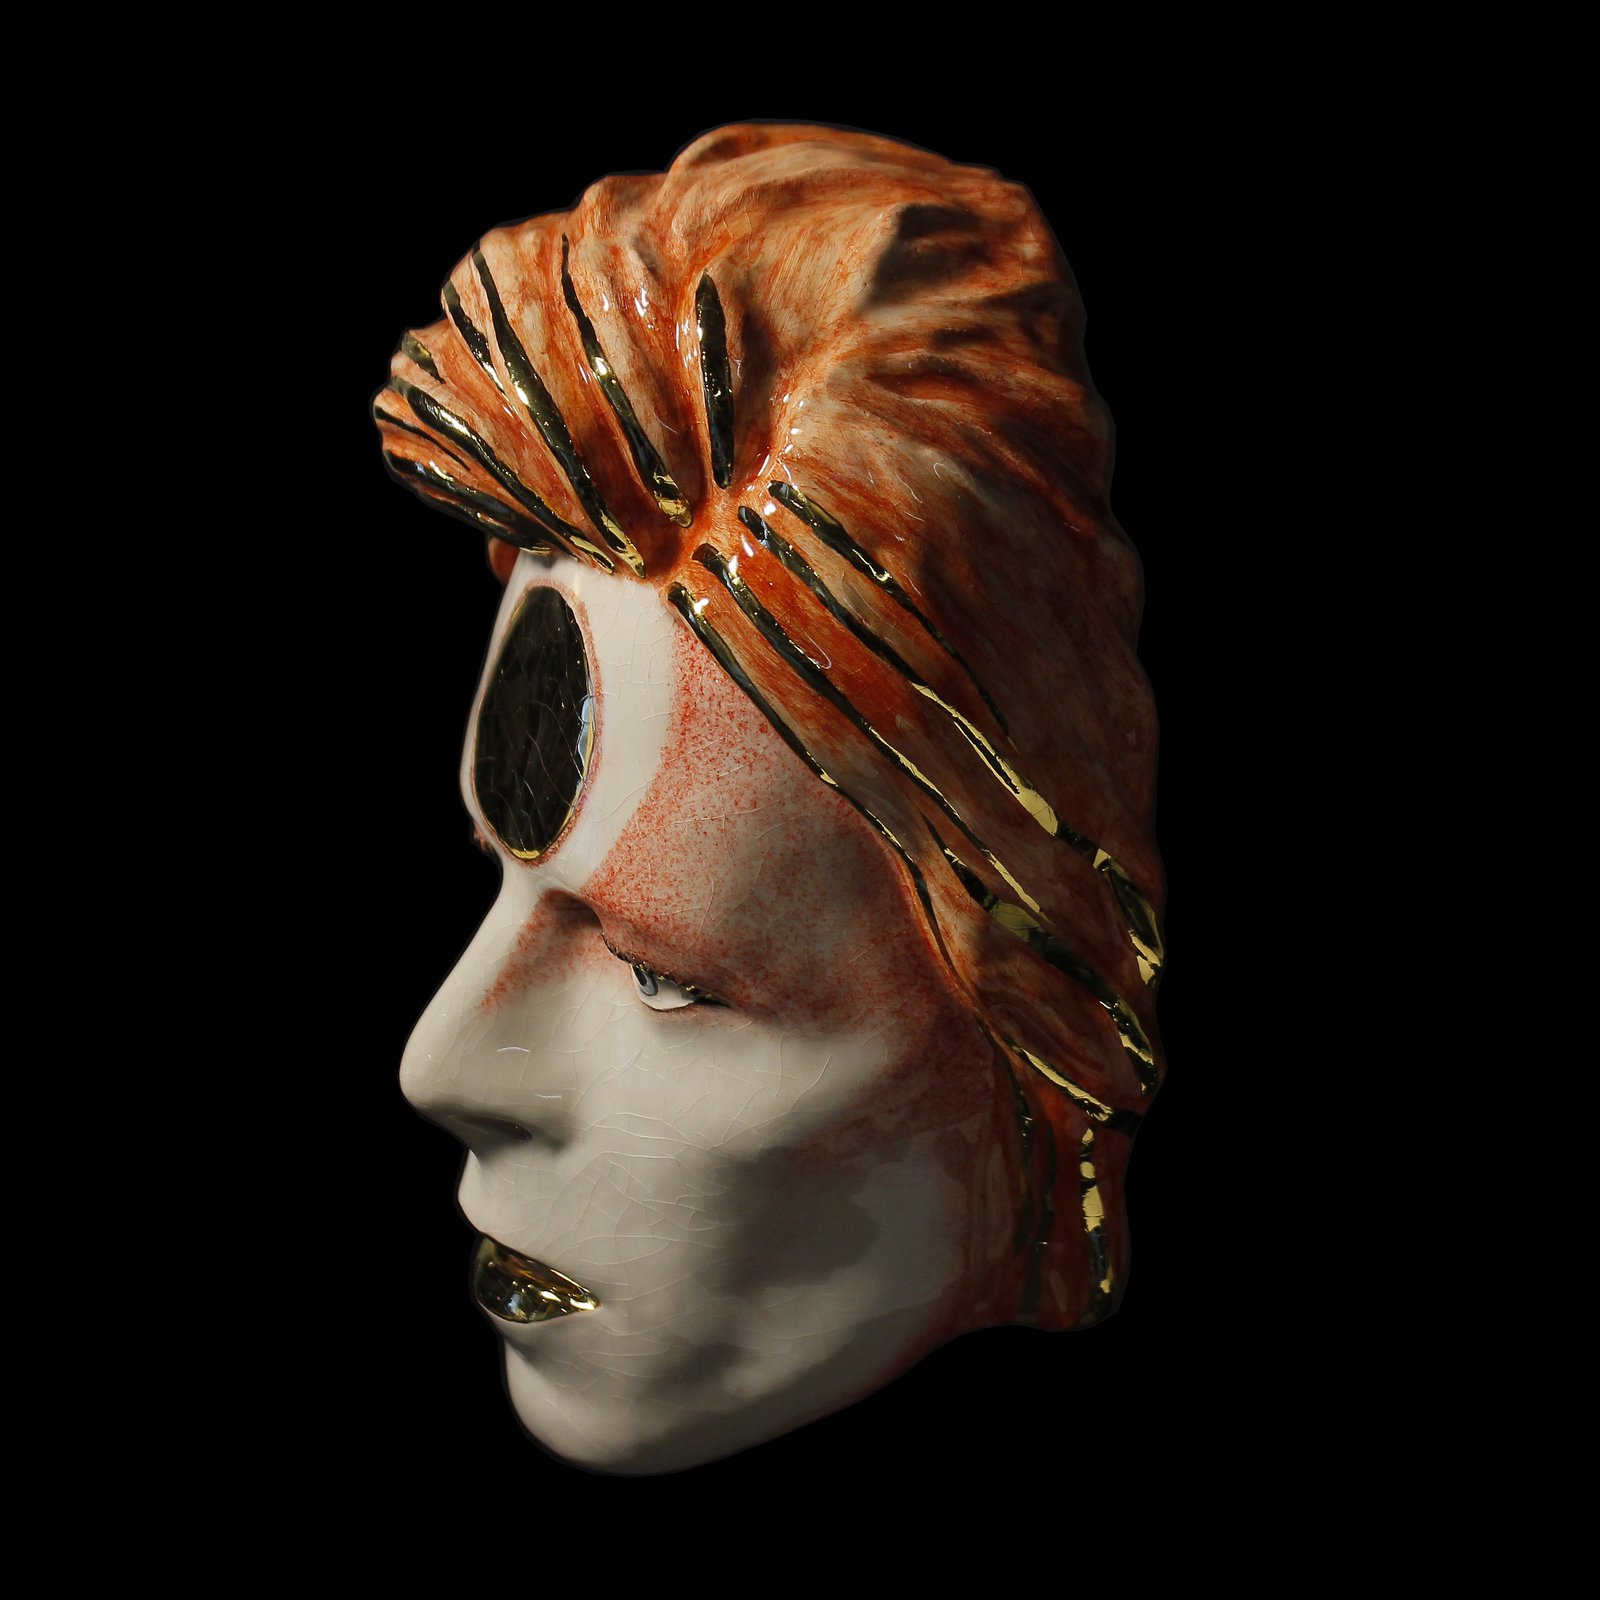 Ziggy Stardust' Special Edition Painted Ceramic Face Sculpture 